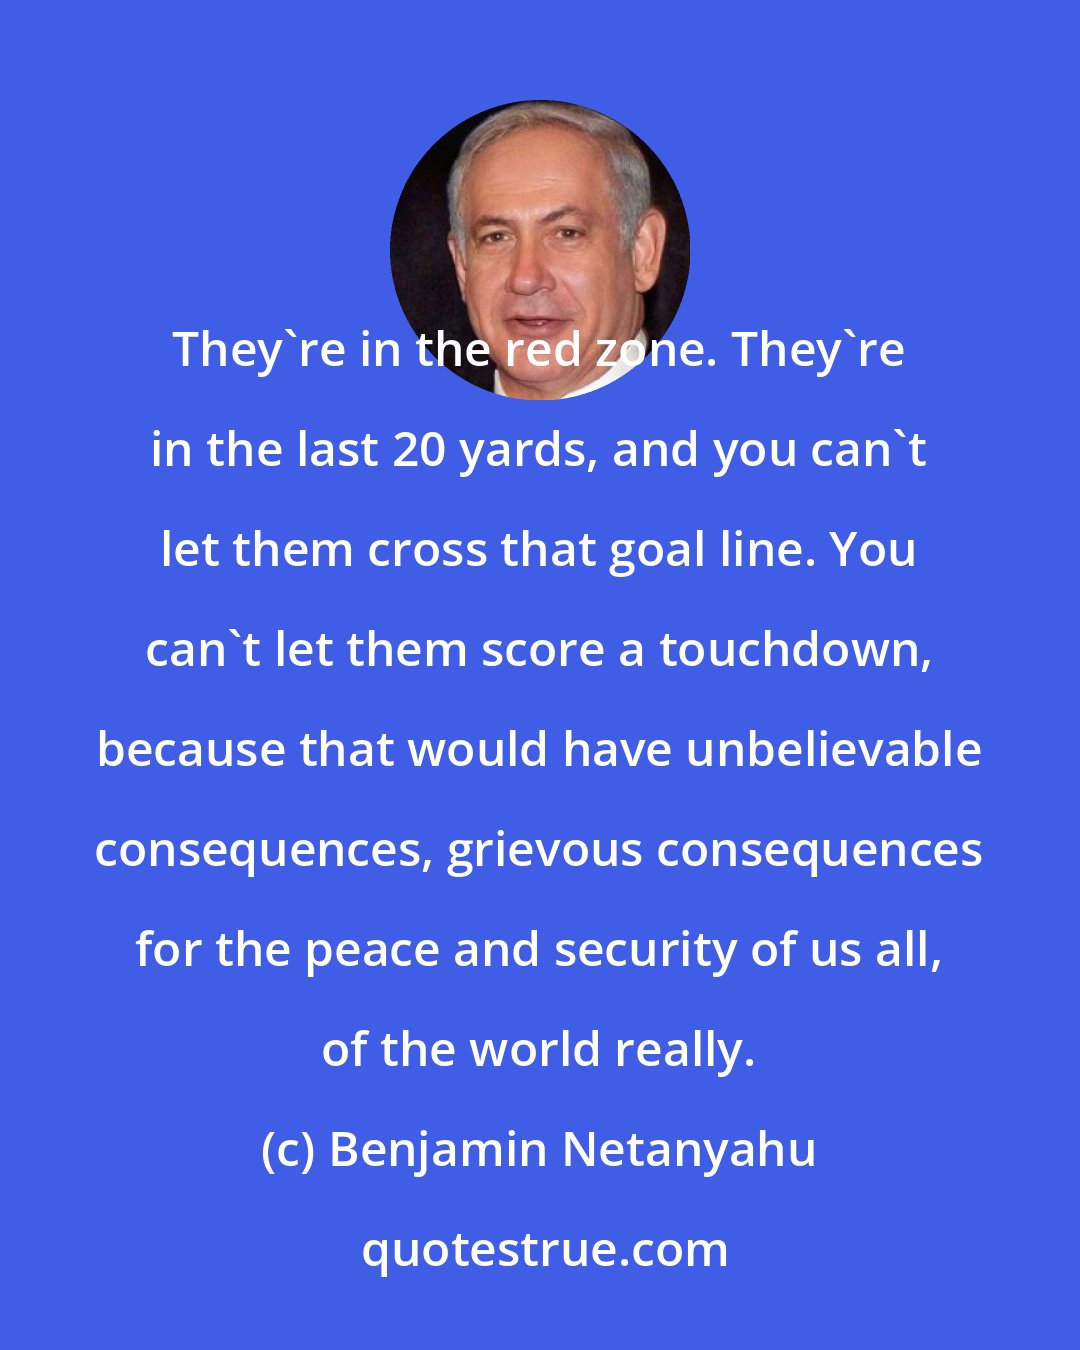 Benjamin Netanyahu: They're in the red zone. They're in the last 20 yards, and you can't let them cross that goal line. You can't let them score a touchdown, because that would have unbelievable consequences, grievous consequences for the peace and security of us all, of the world really.